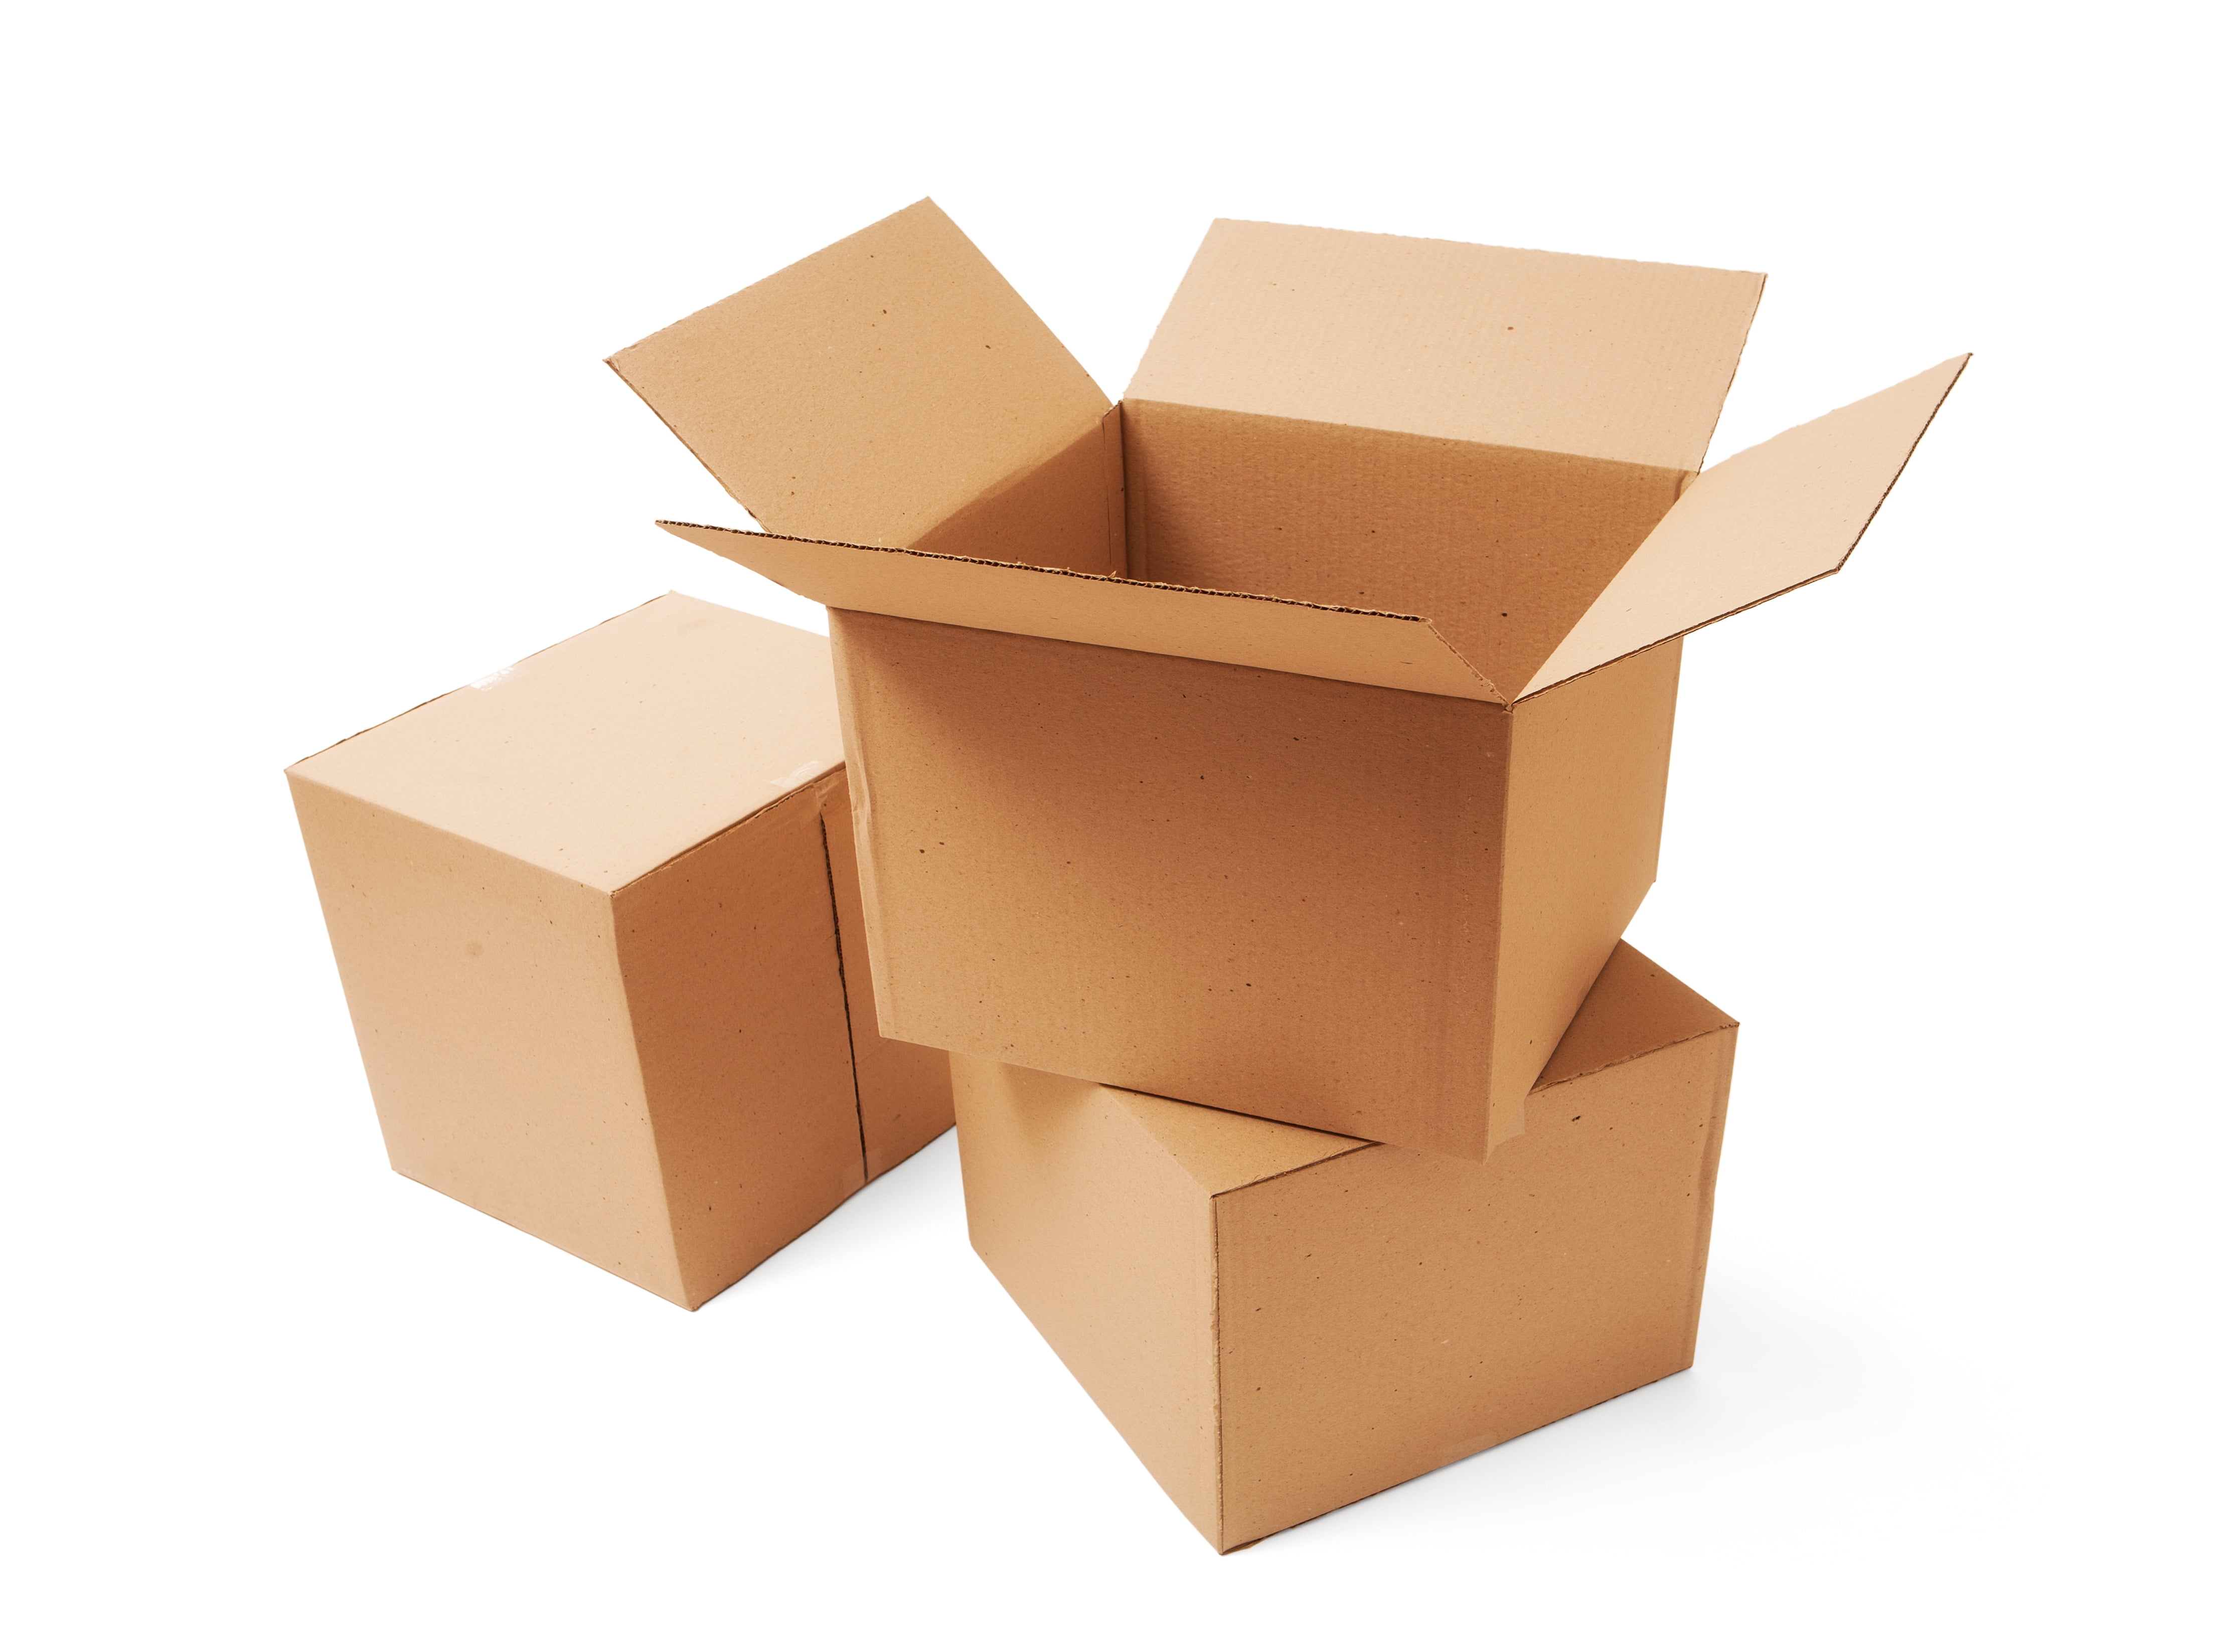 9x6x6 Moving Box Packaging Boxes Cardboard Corrugated Packing Shipping 